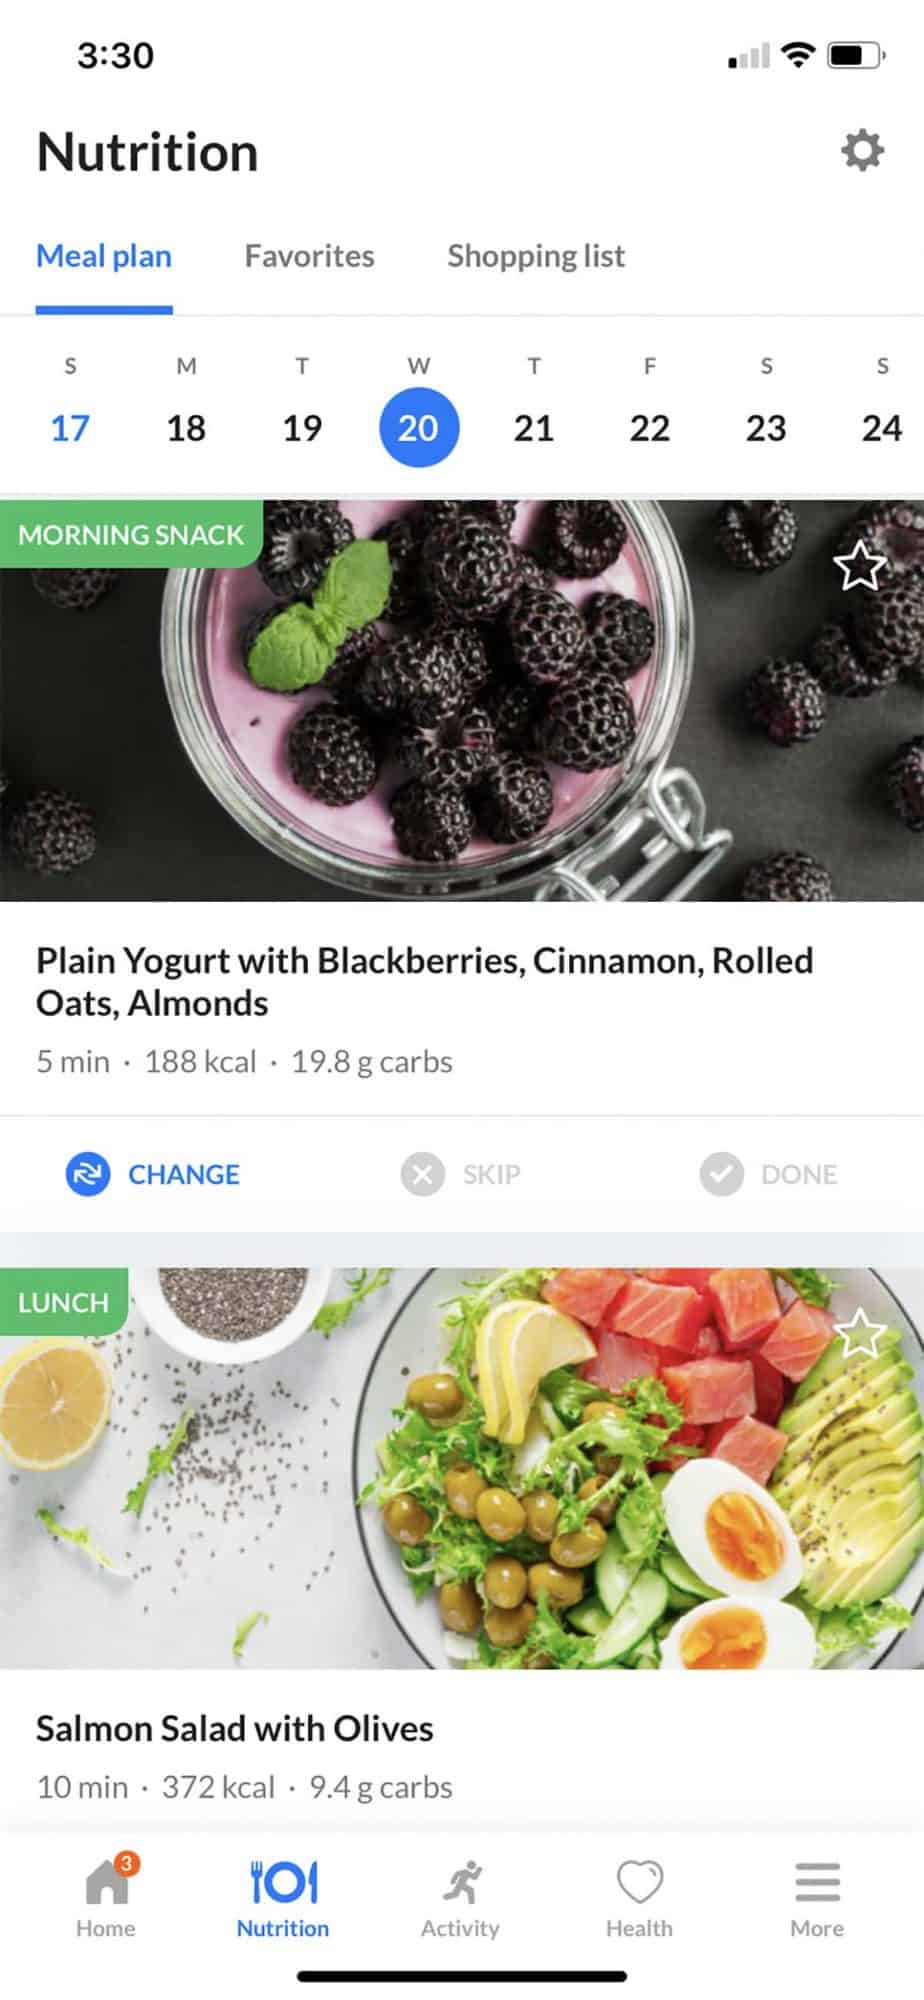 Screenshot of meal plan from the app